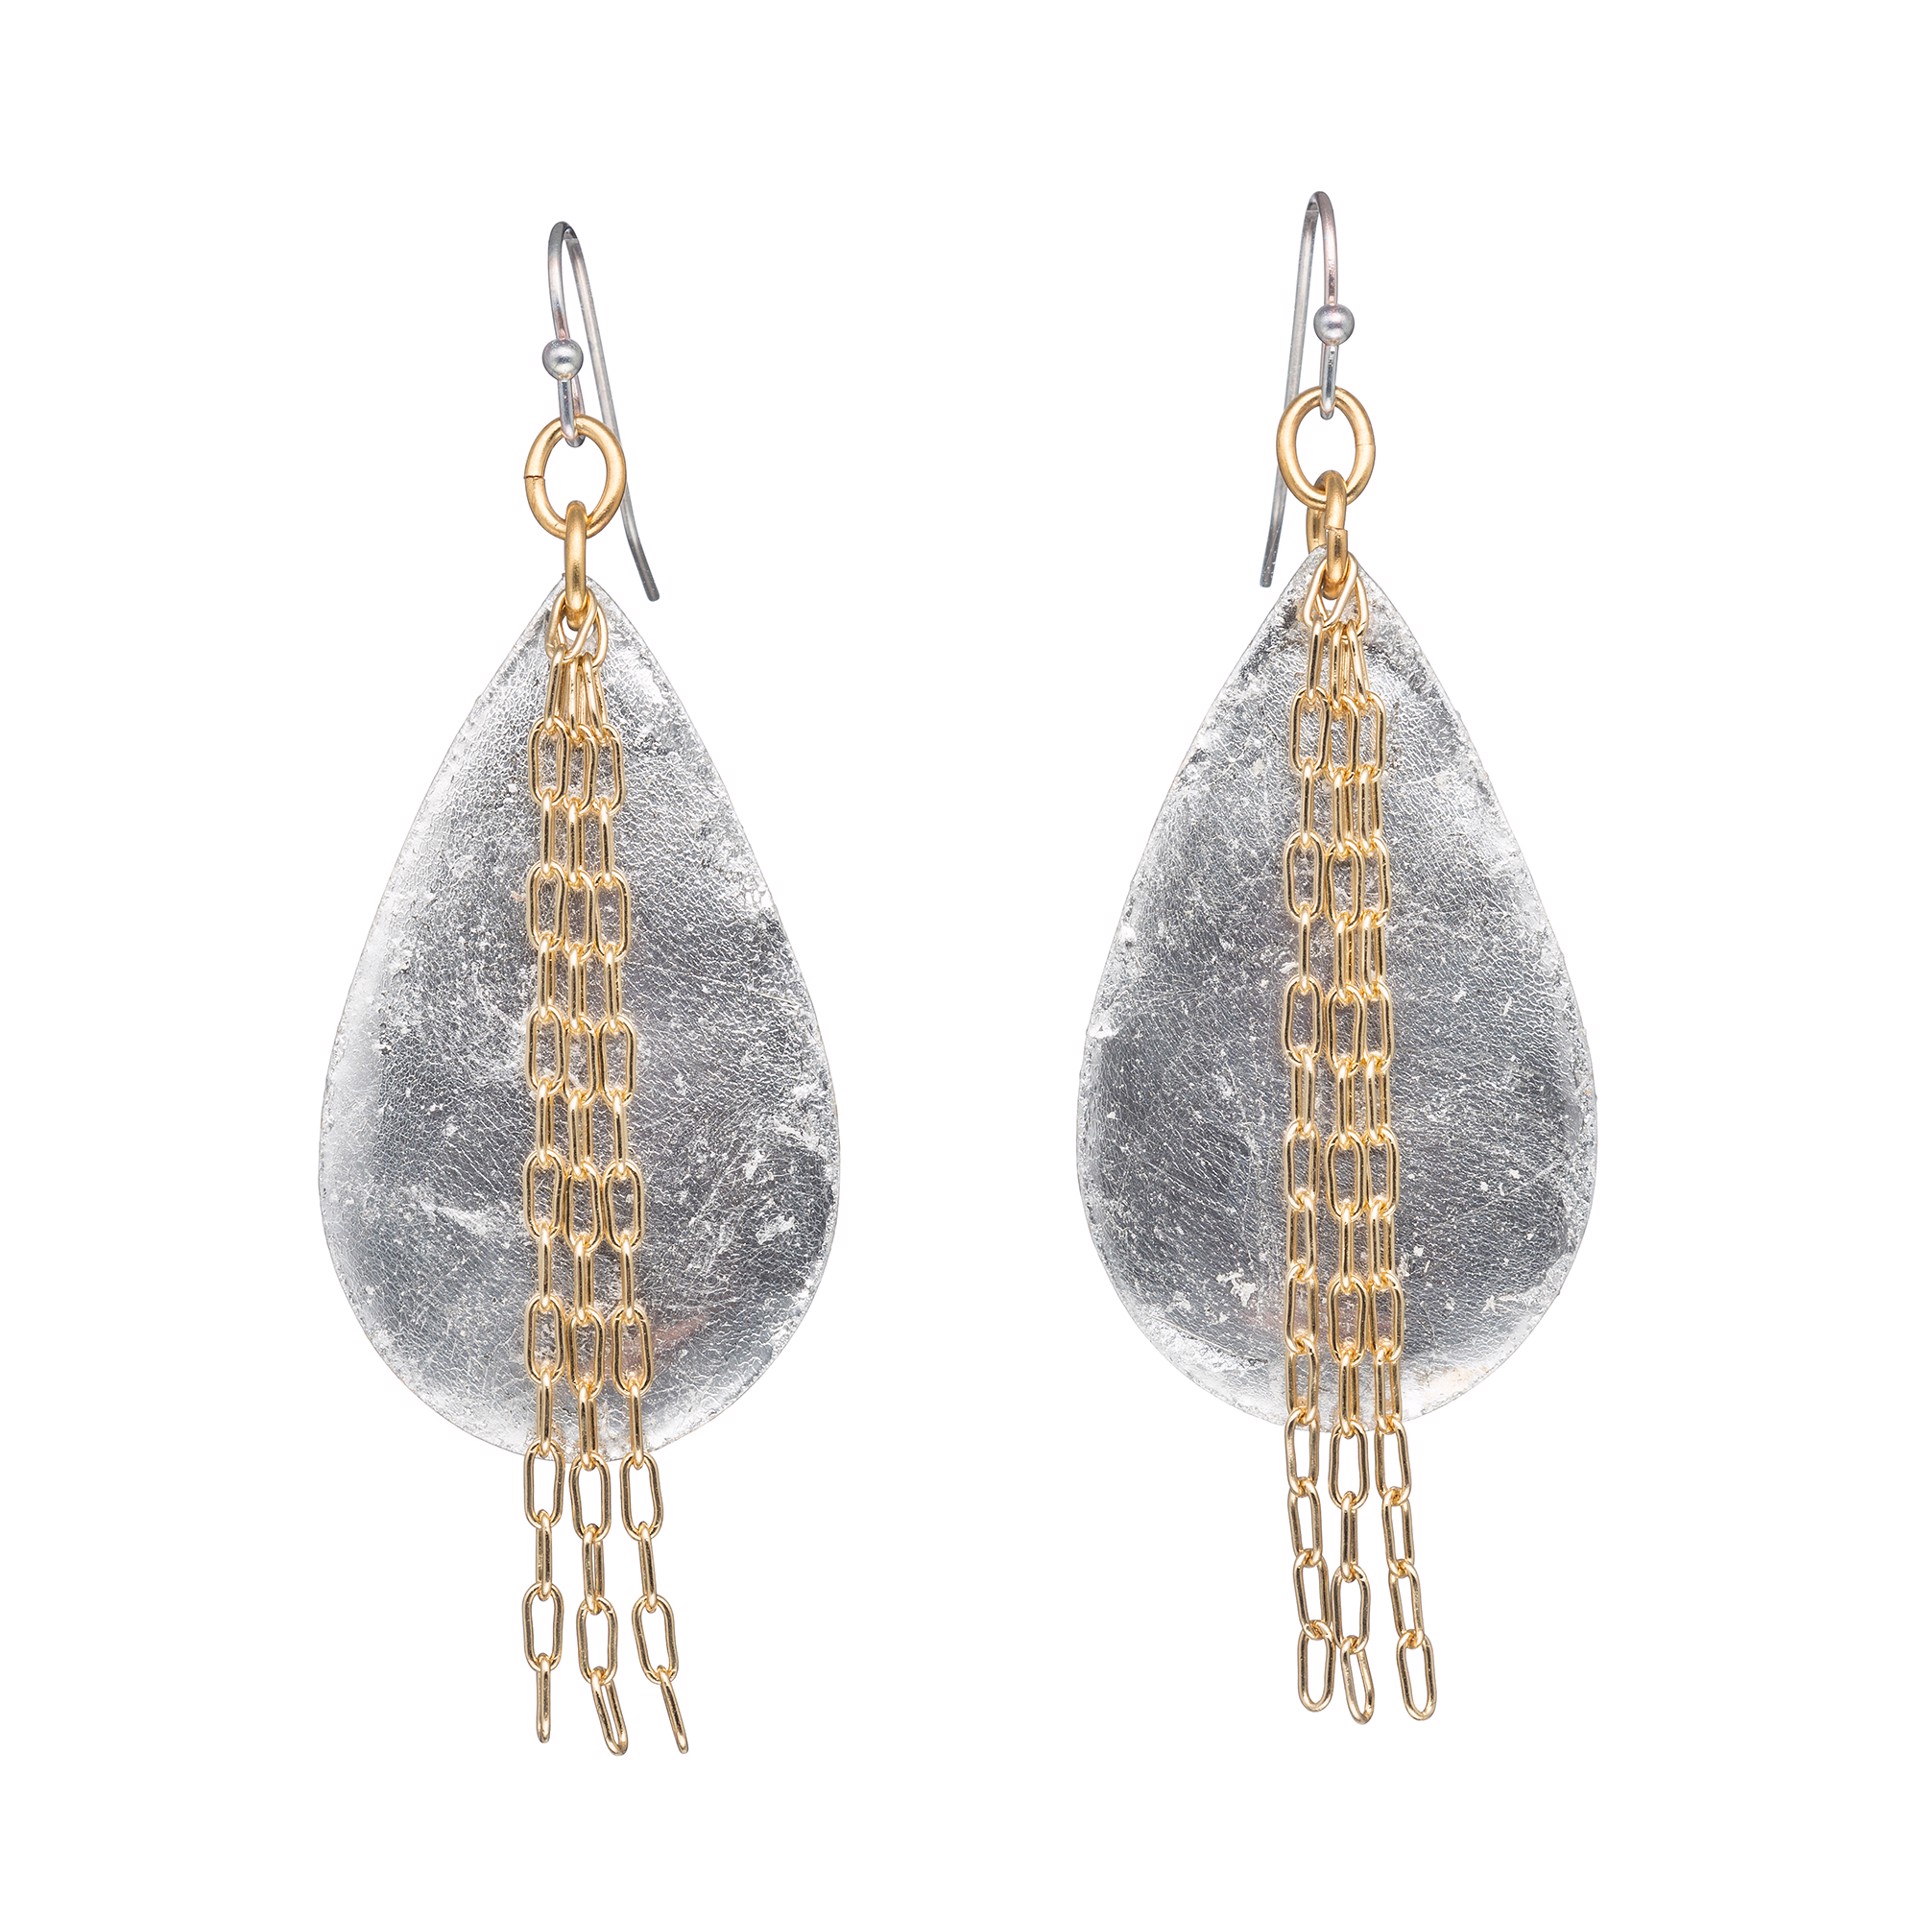 Delia Medium Teardrop Earrings, Silver with Gold Chain by Evocateur